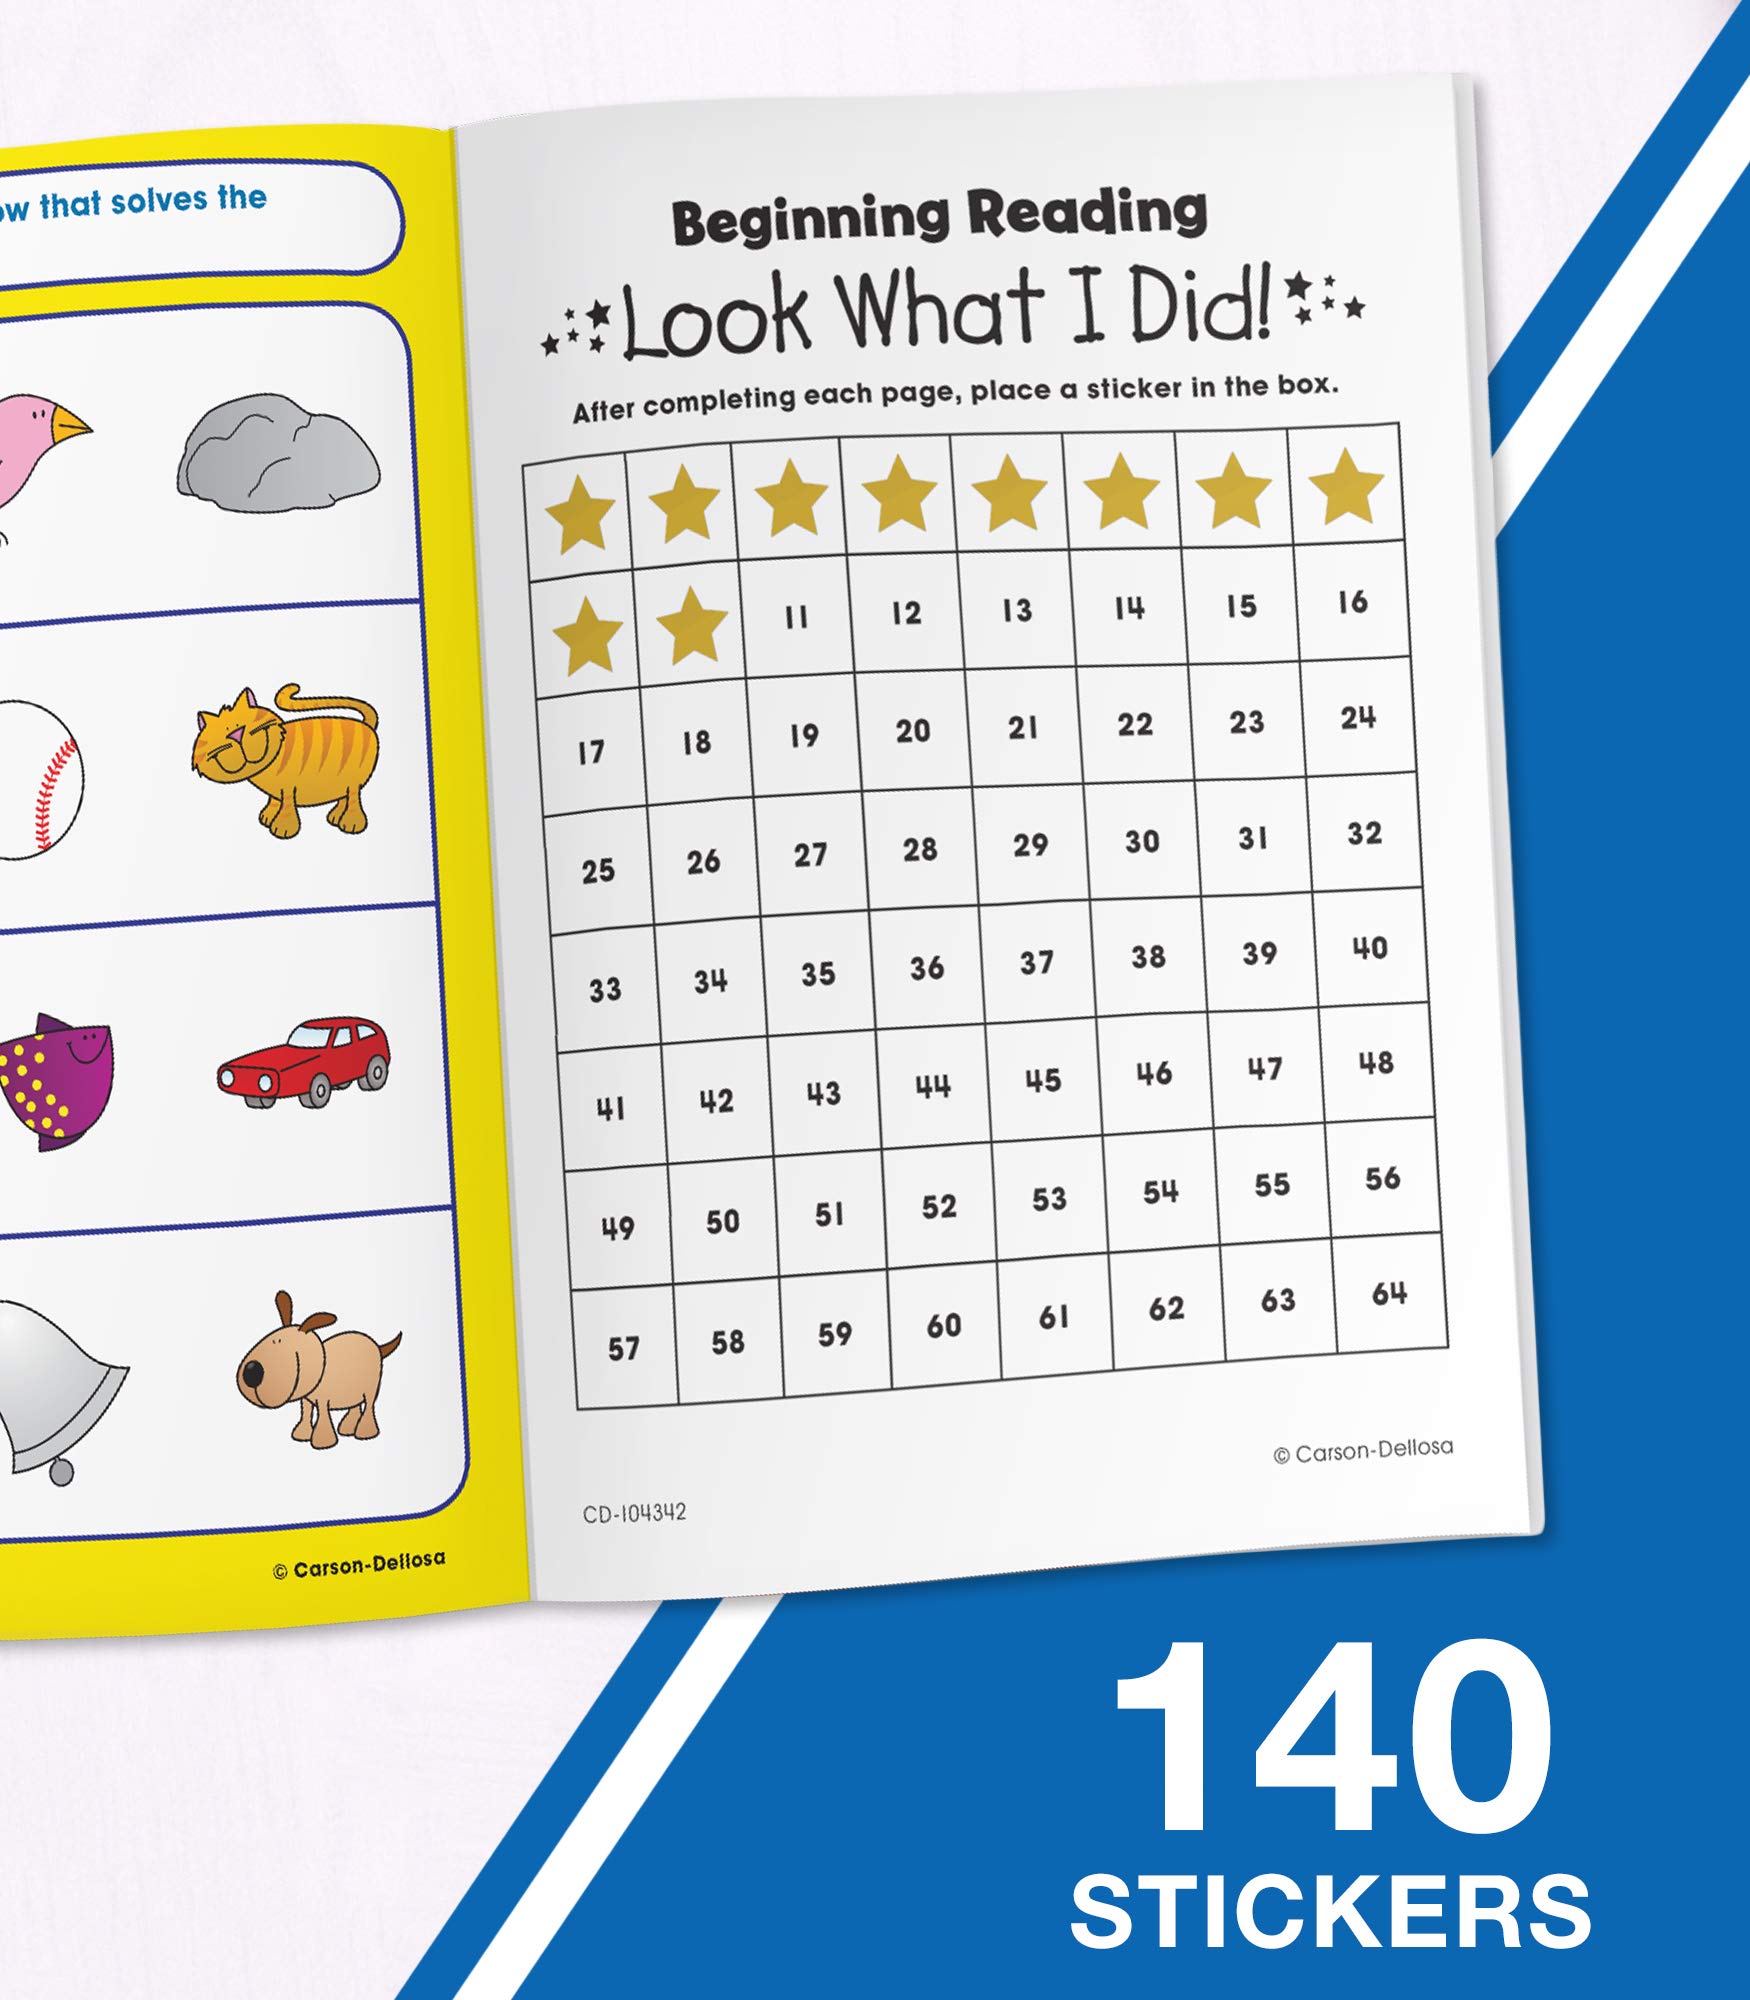 Carson Dellosa Beginning Reading Workbook―Kindergarten Early Reader Phonics Practice With Stickers, Incentive Chart, Puzzles, Coloring Activities (64 pgs) (Volume 3) (Home Workbooks)